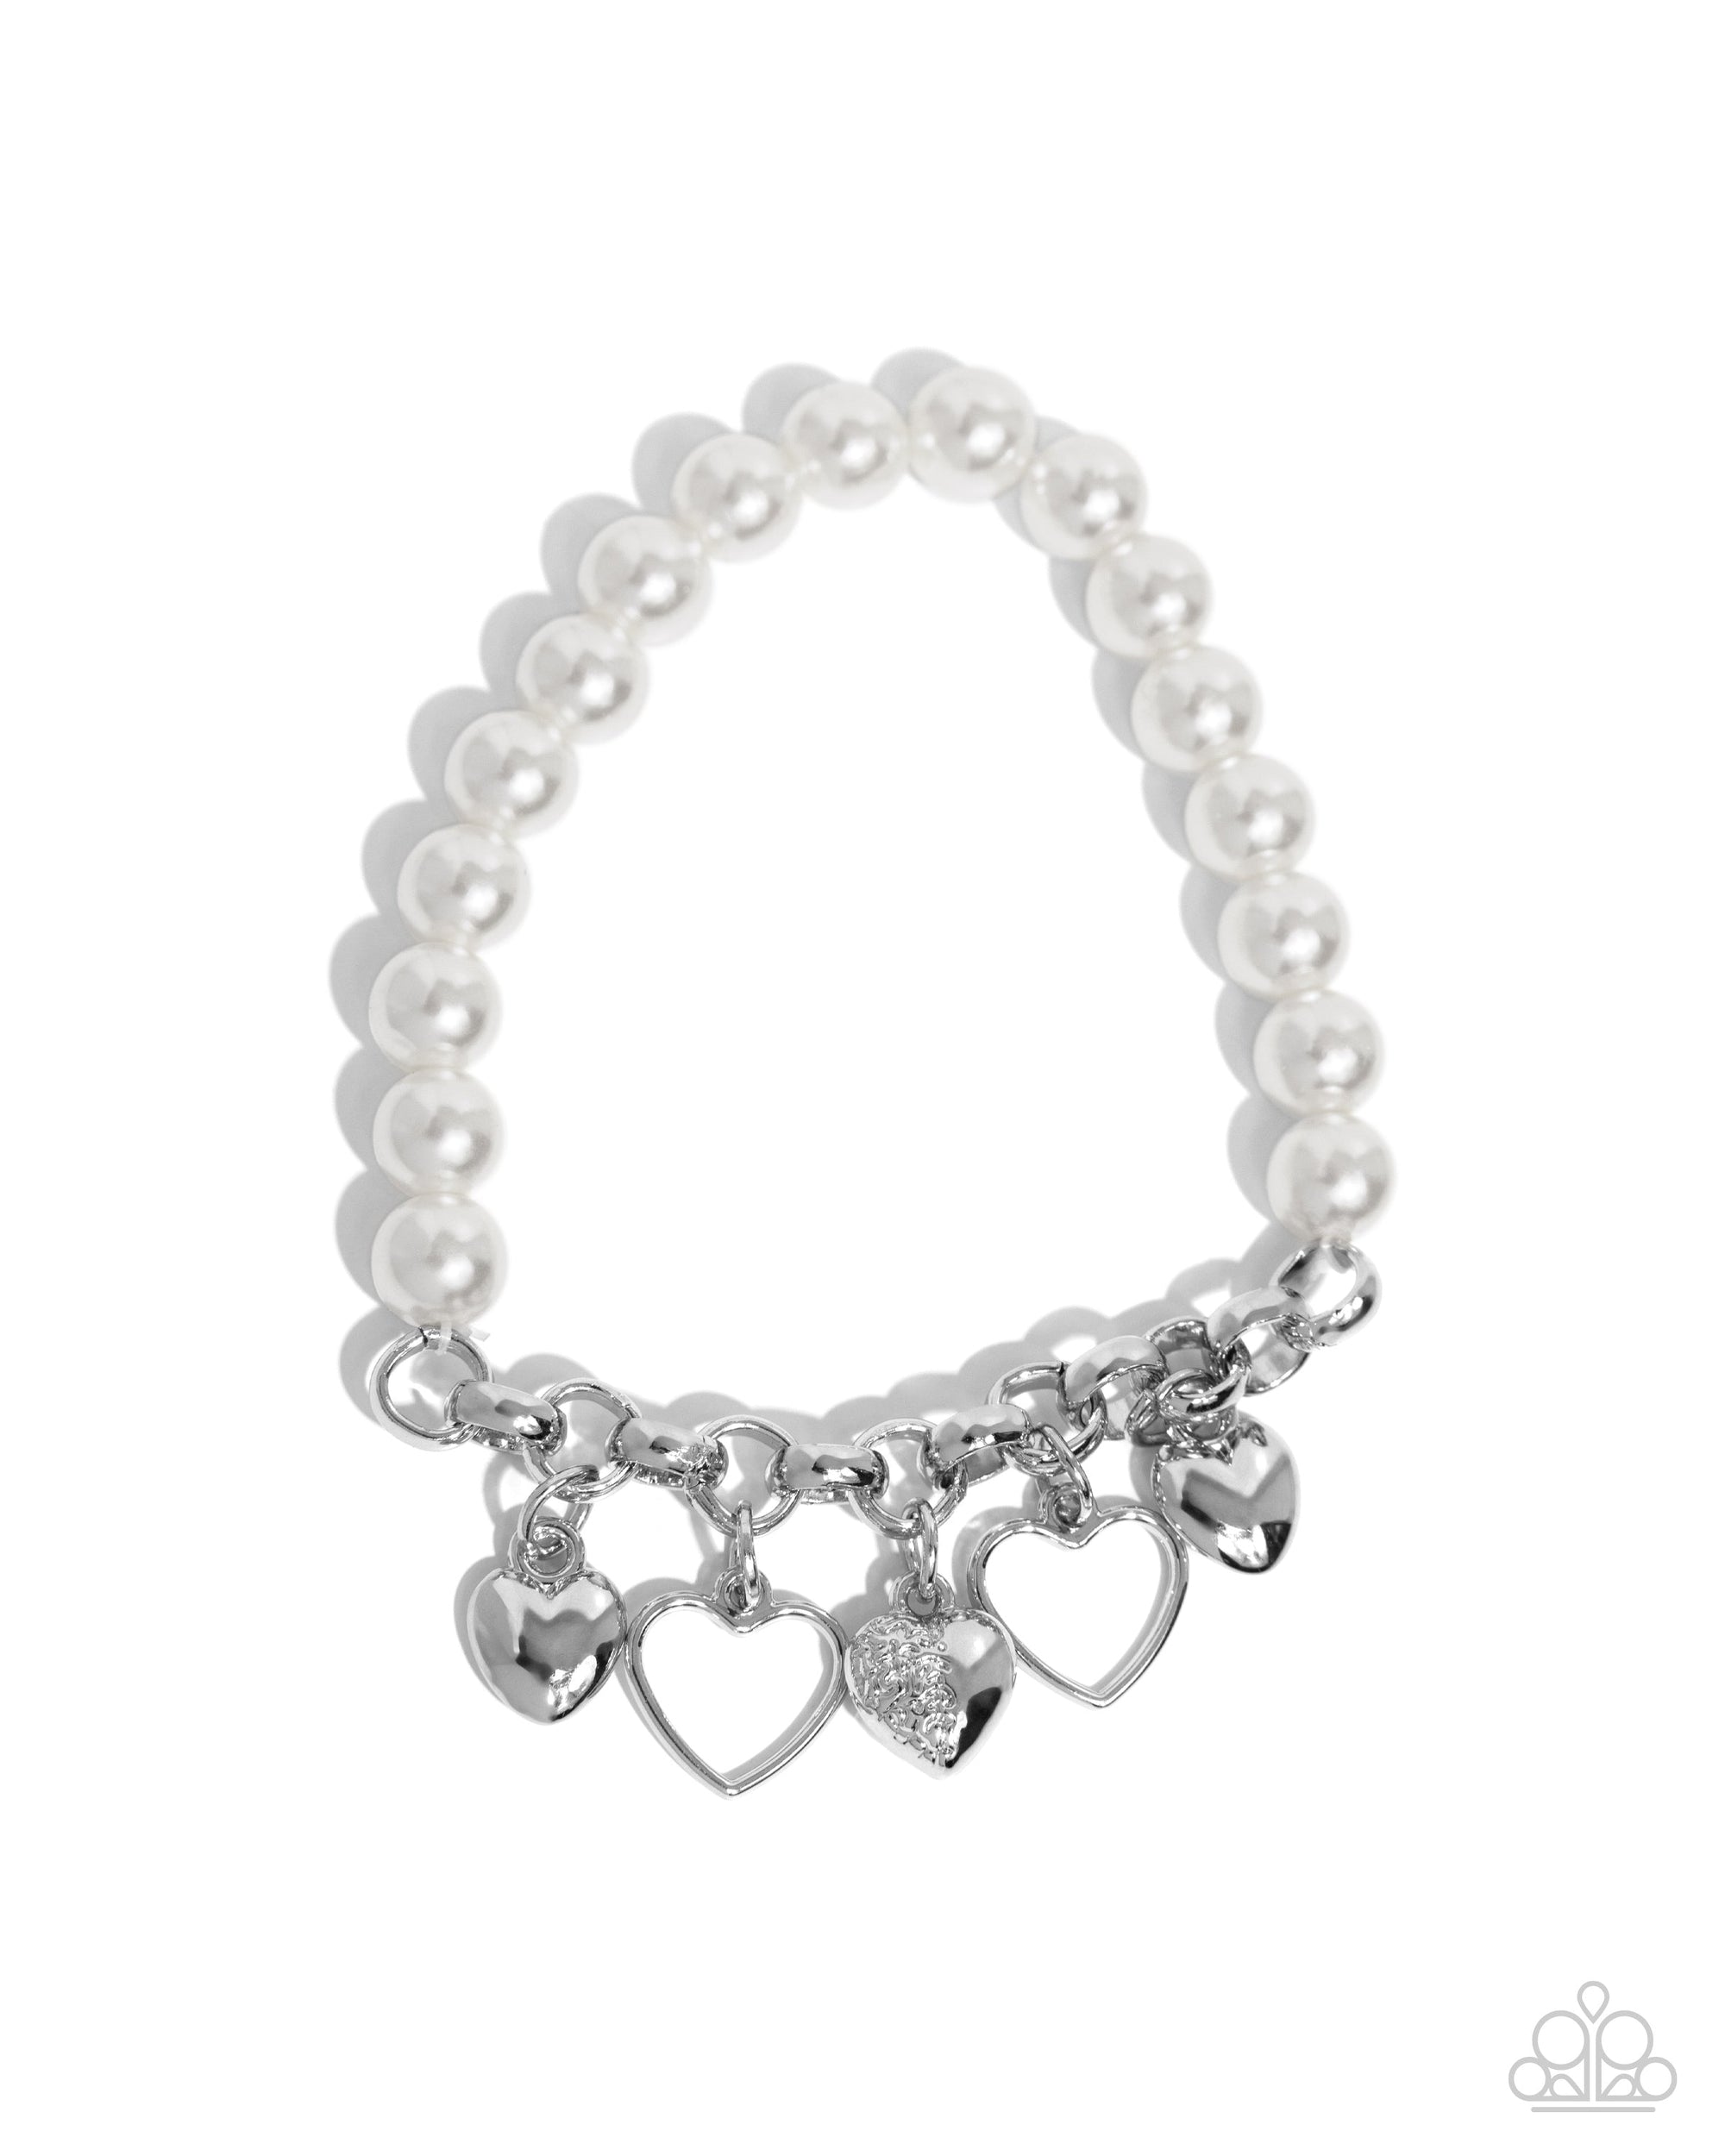 Charming Candidate White Pearl and Heart Charm Bracelet - Paparazzi Accessories- lightbox - CarasShop.com - $5 Jewelry by Cara Jewels